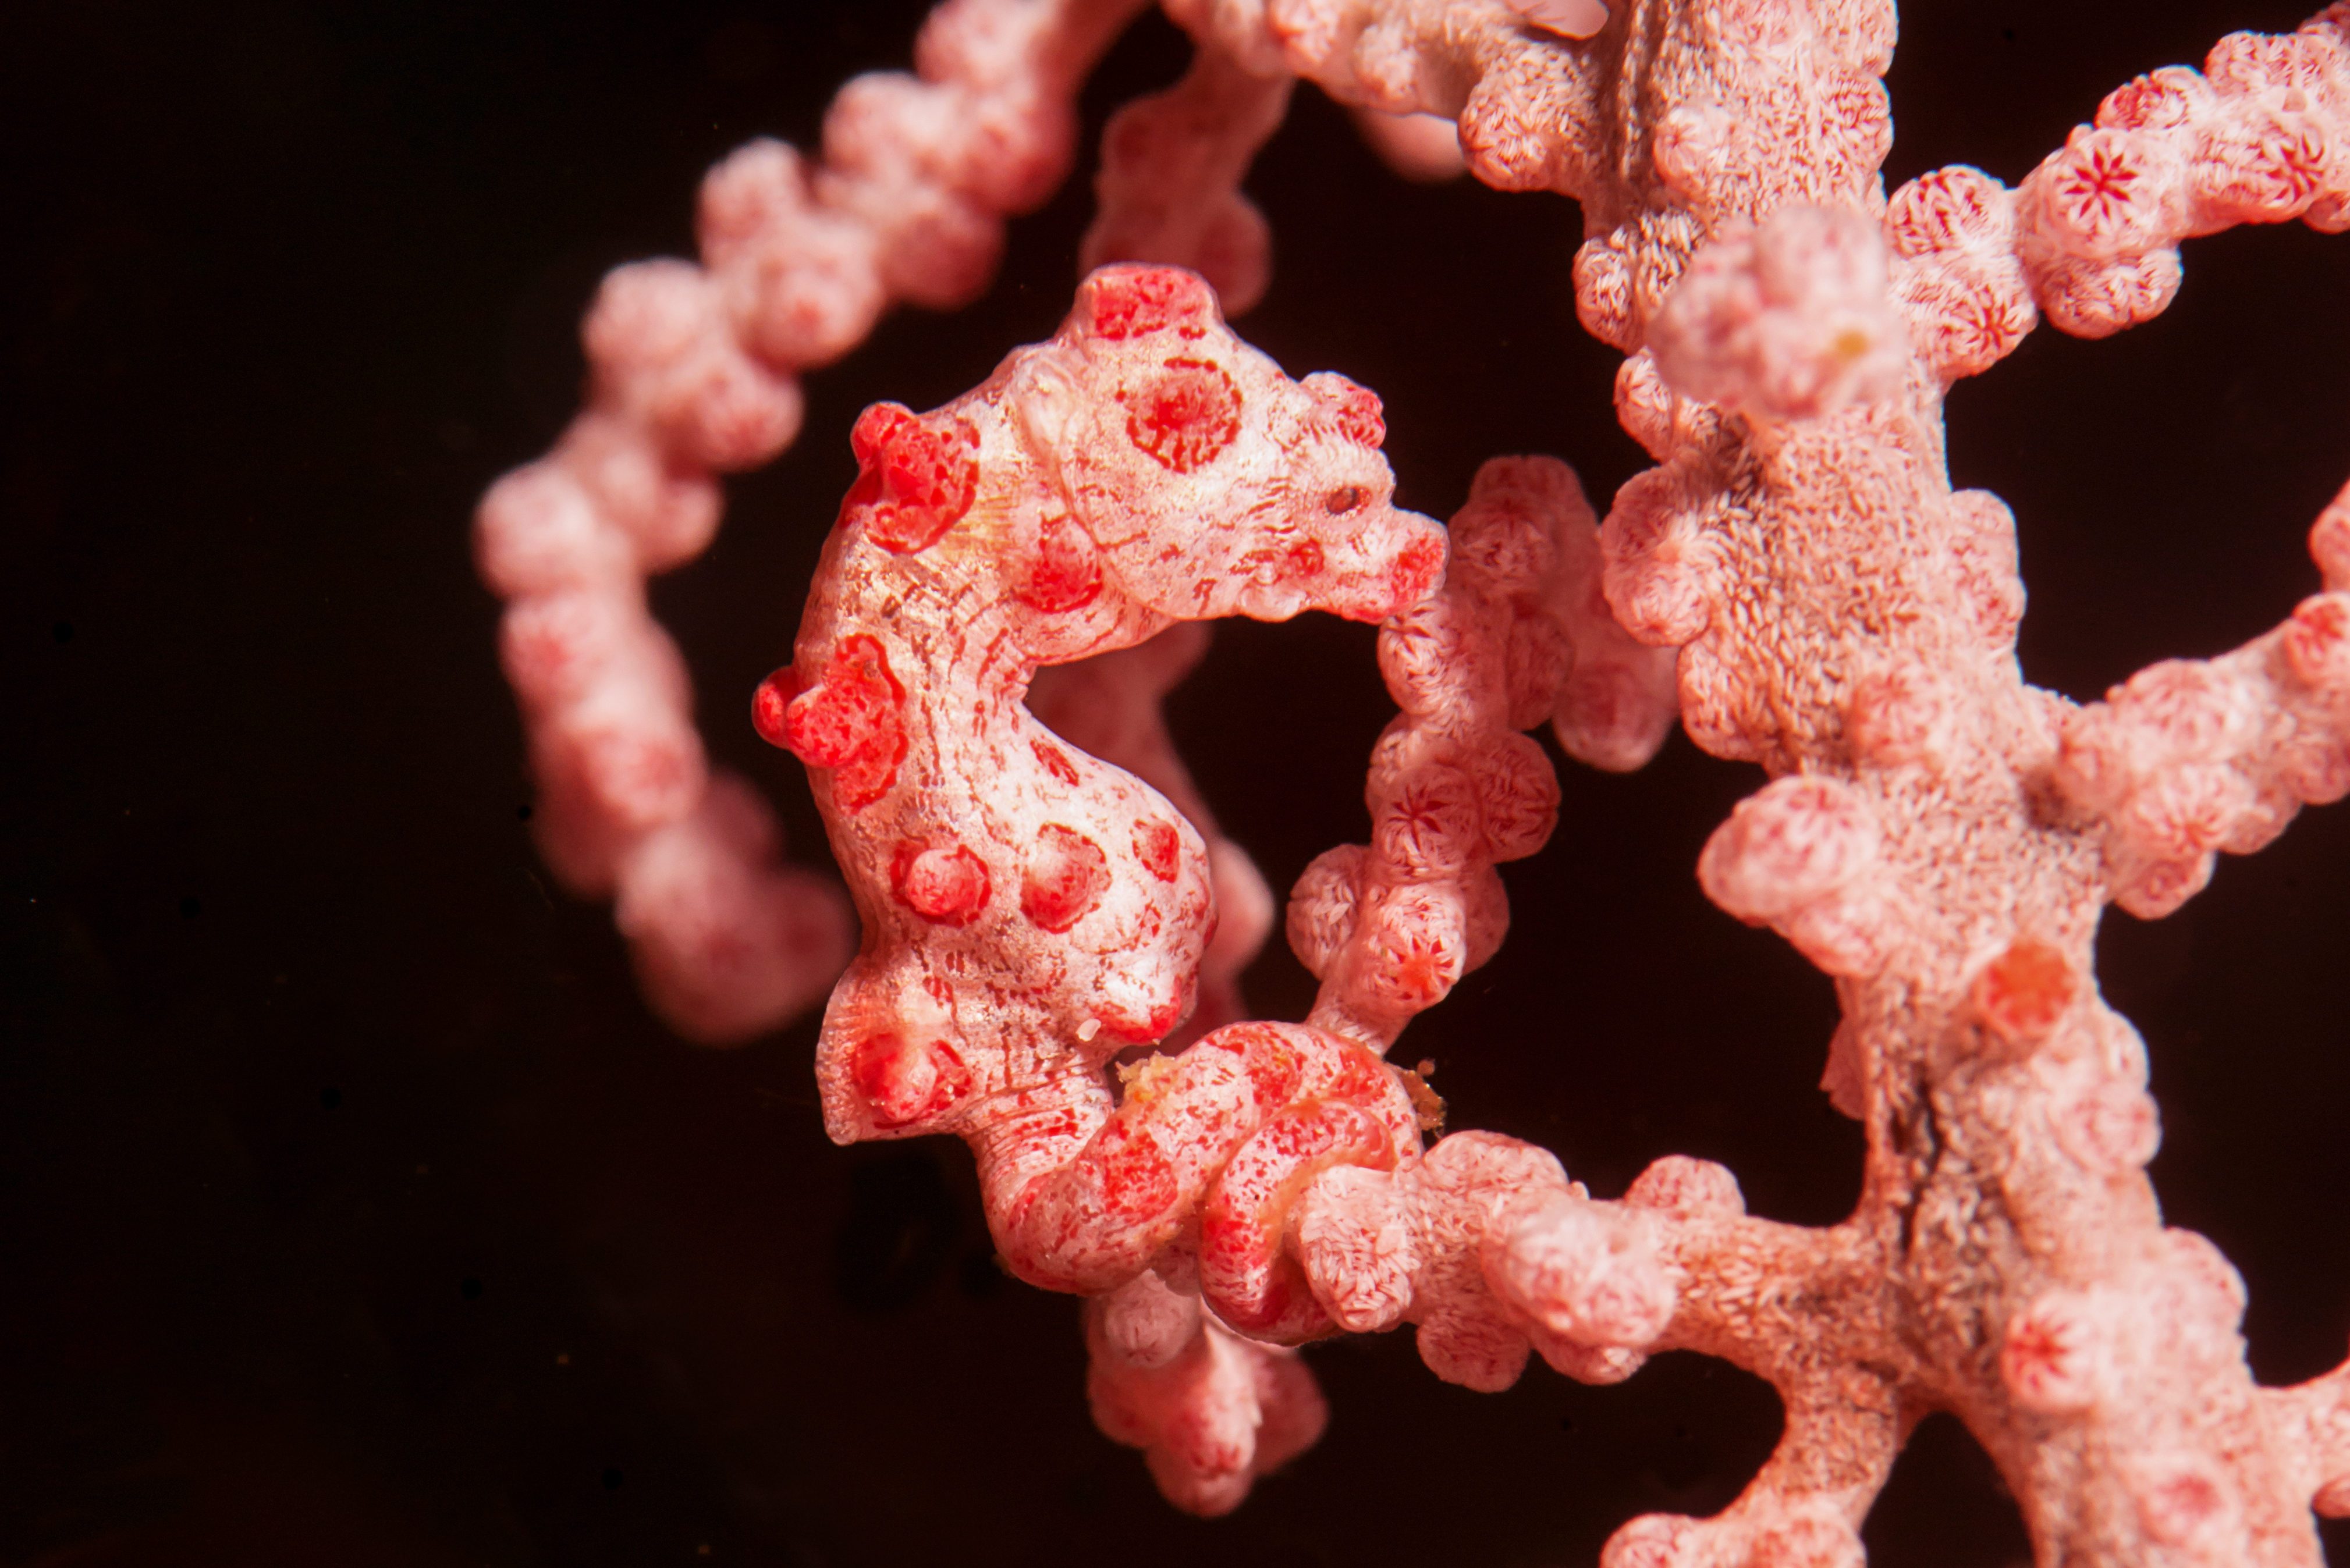 Hippocampus bargibanti, also known as Bargibant's seahorse or the pygmy seahorse, is well camouflaged on corals of Bali